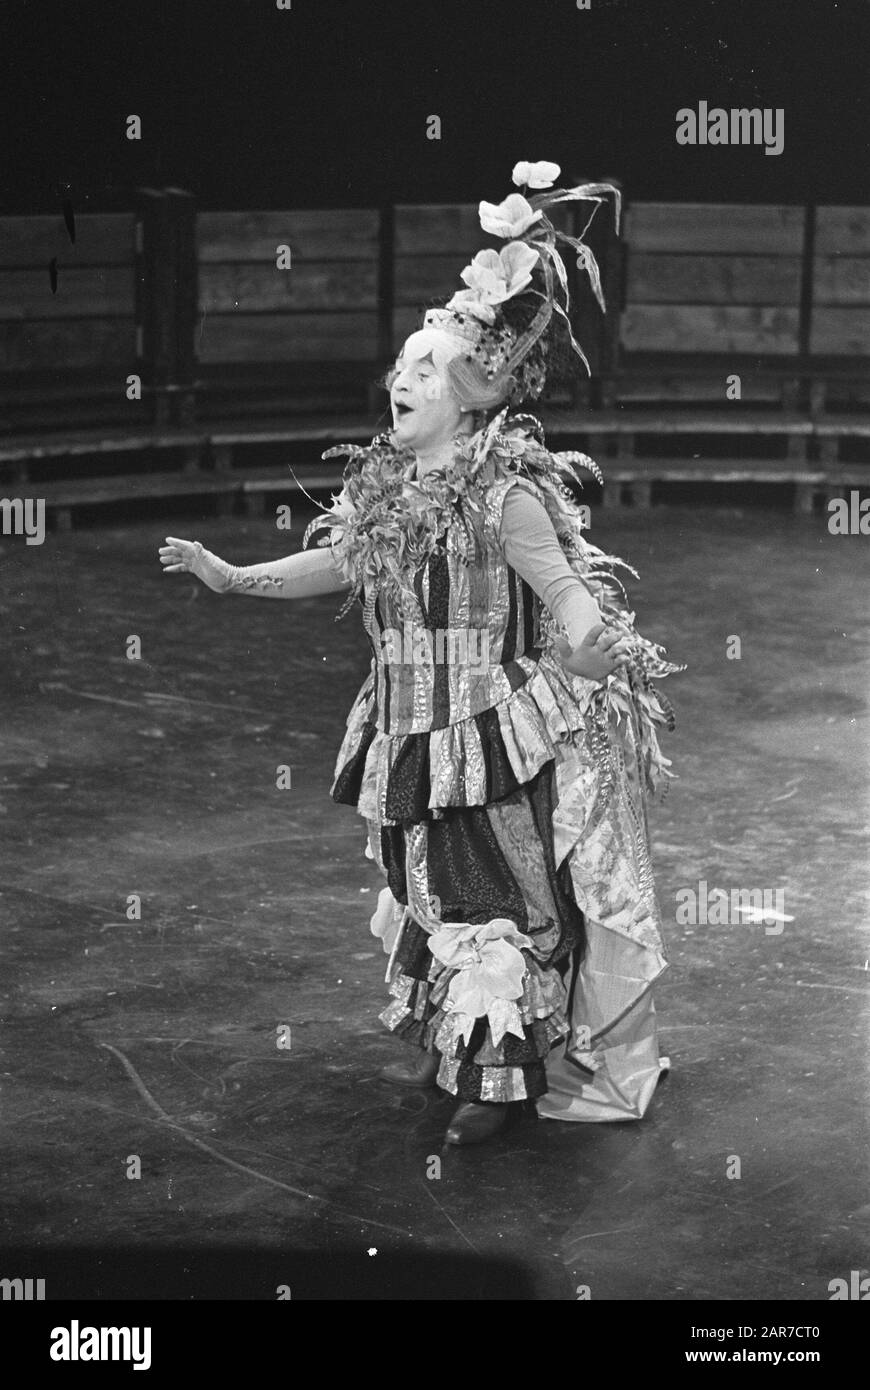 Opera Platée by composer Jean Philippe Rameau in Carre. Platée (Michel  Senechal) in his costume Date: June 13, 1968 Location: Amsterdam,  Noord-Holland Keywords: opera's Personal name: Senechal, Michel Stock Photo  - Alamy